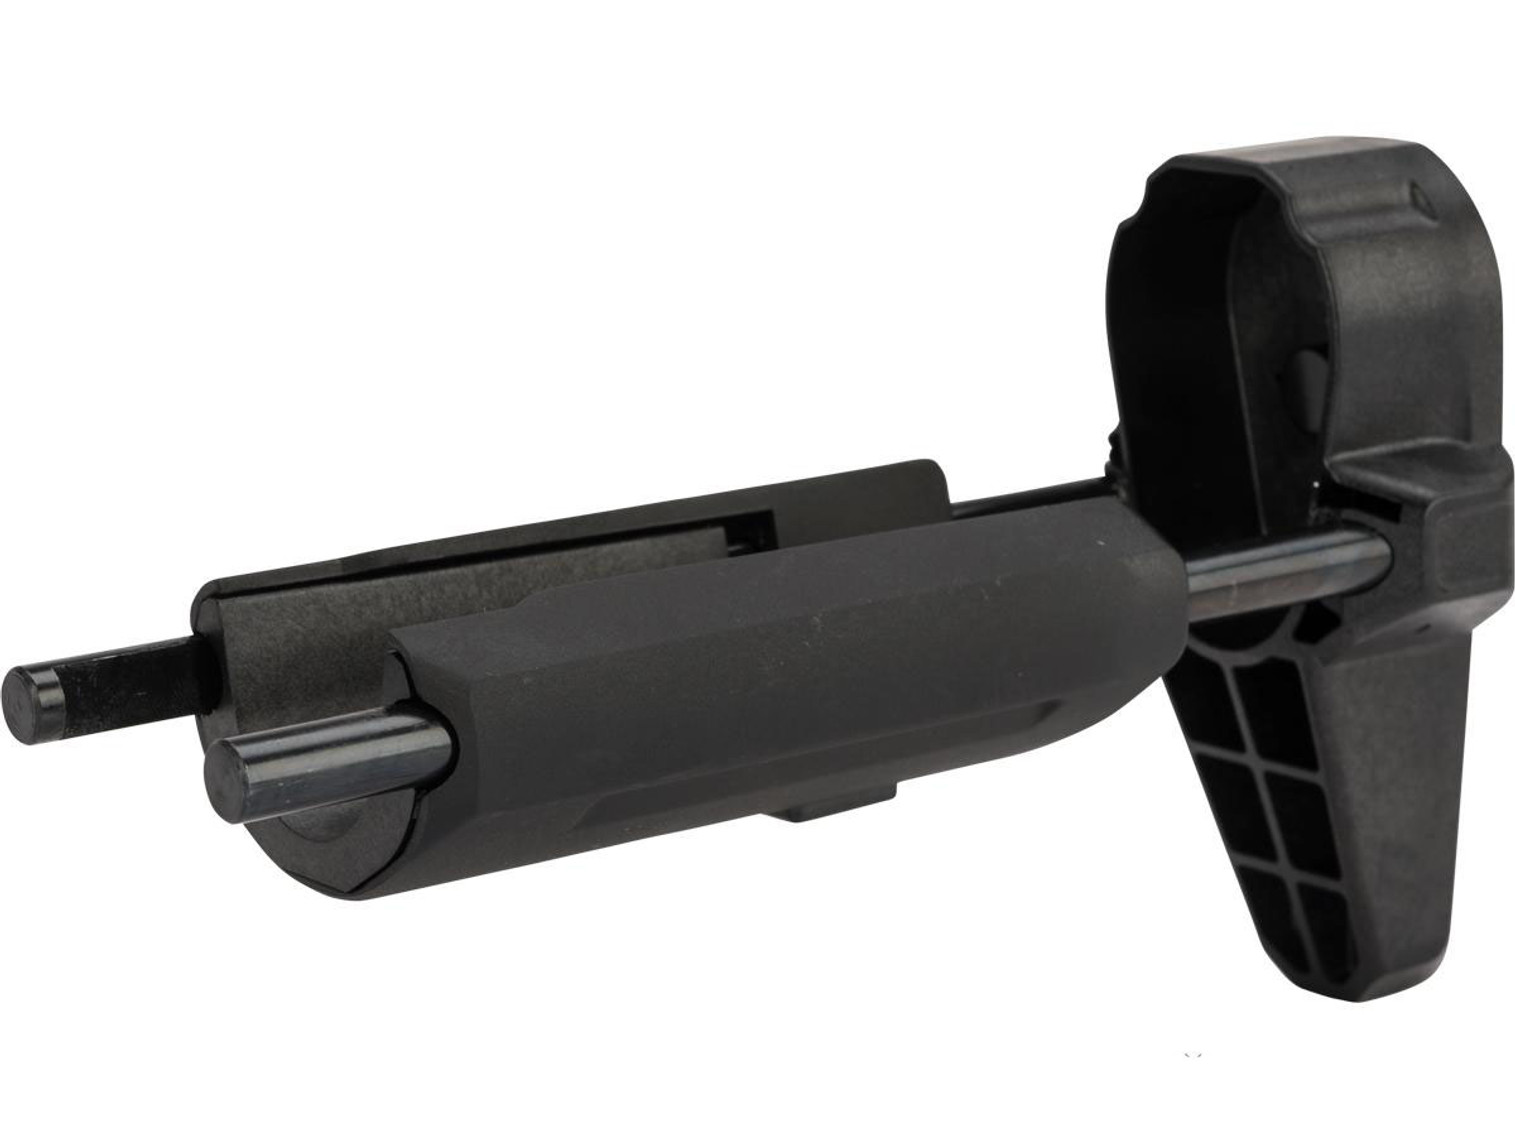 Krytac Airsoft Compact Carbine / PDW Replacement Stock for M4/M16 Series AEGs